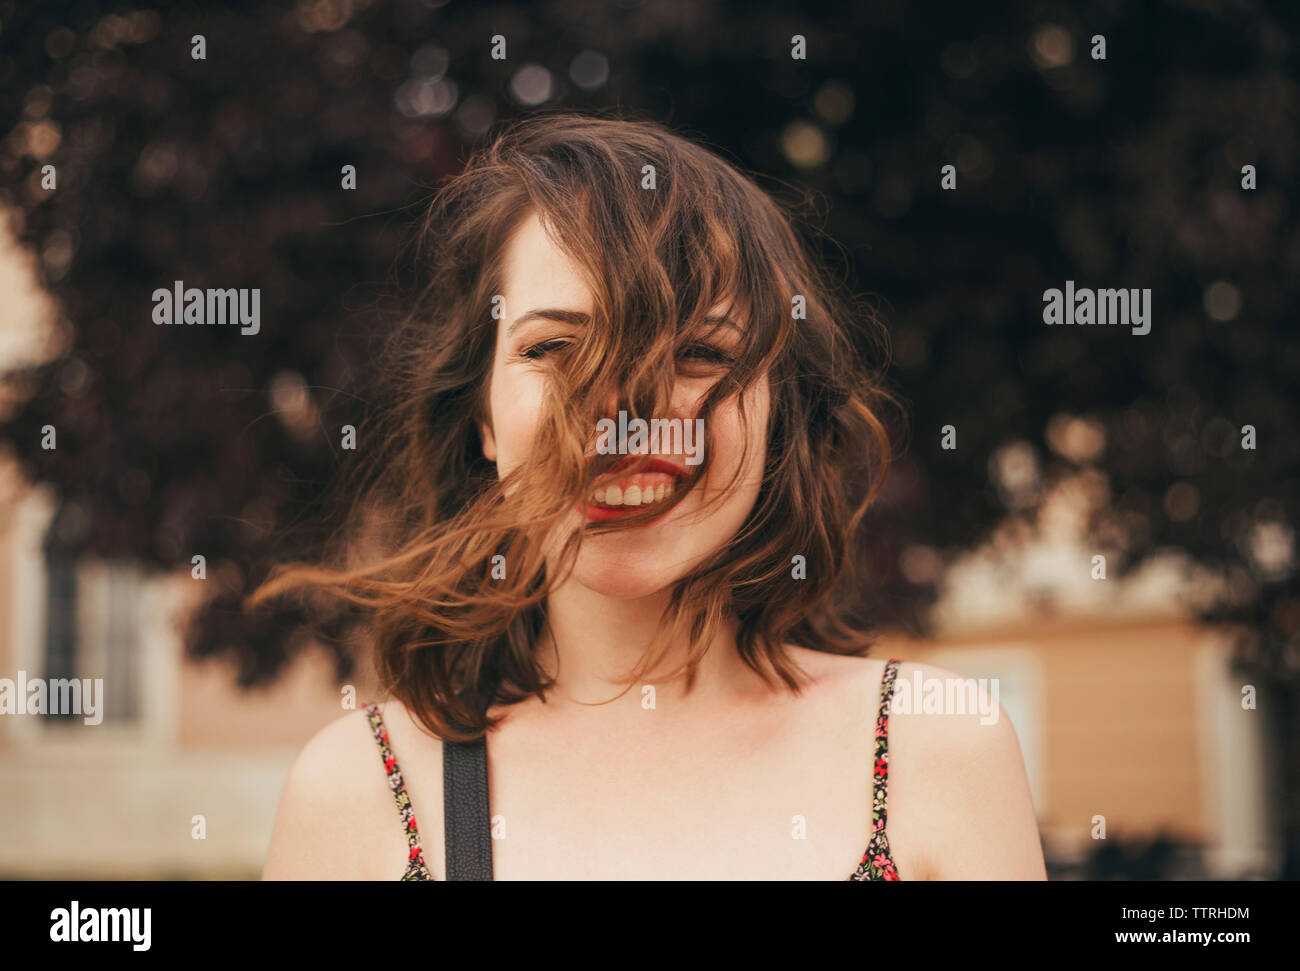 Portrait of happy young woman with tousled hair outdoors Stock Photo